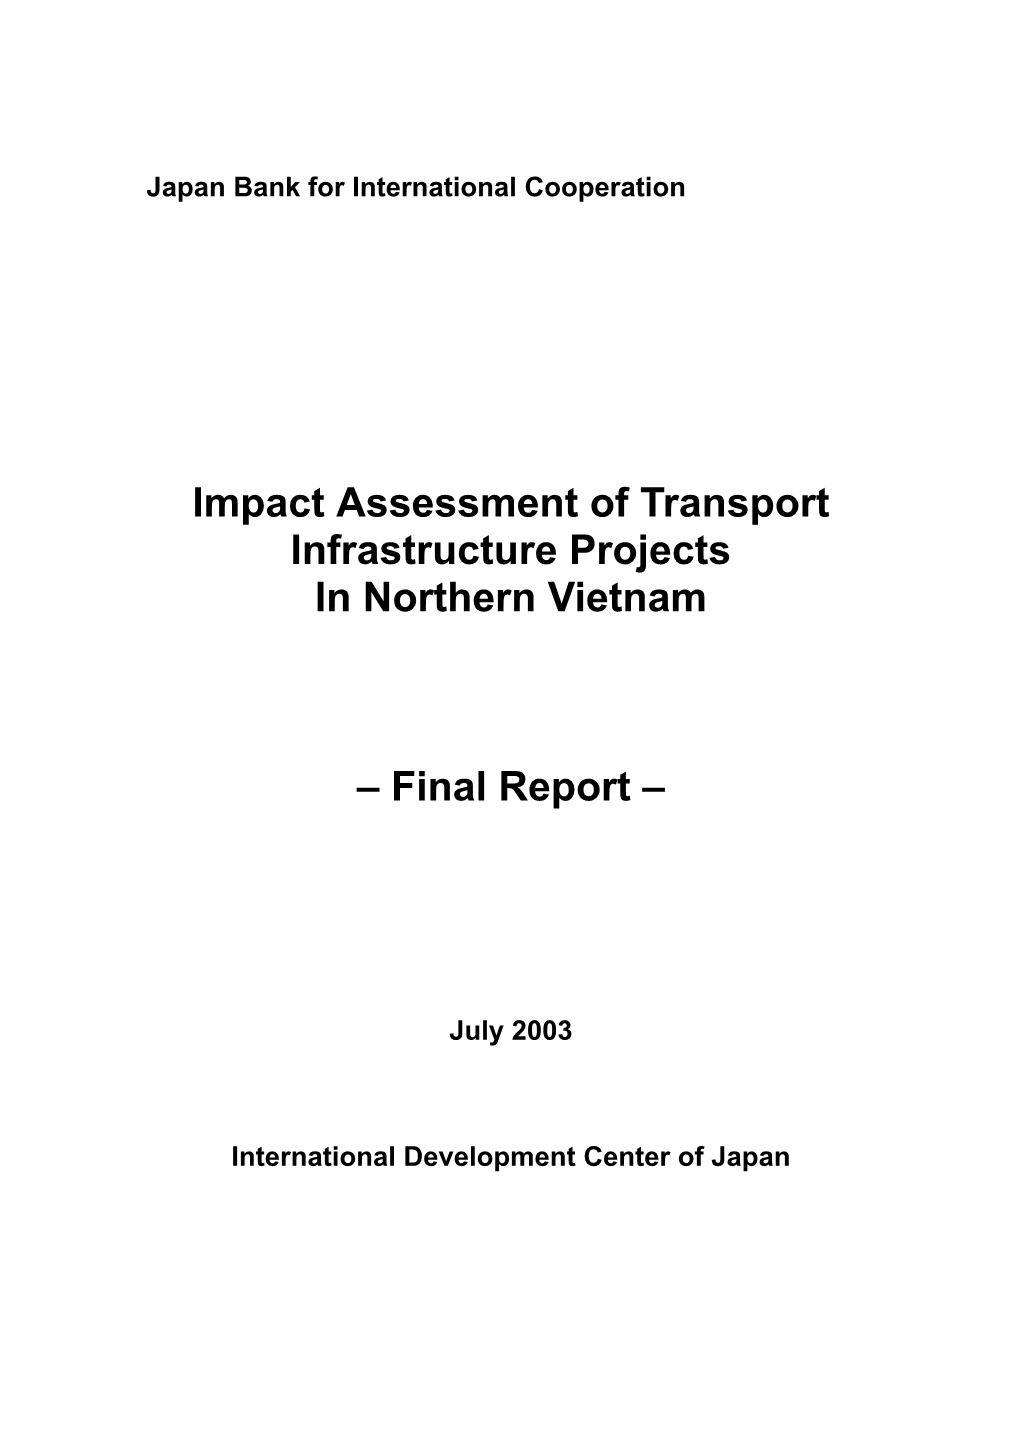 Impact Assessment of Transport Infrastructure Projects in Northern Vietnam